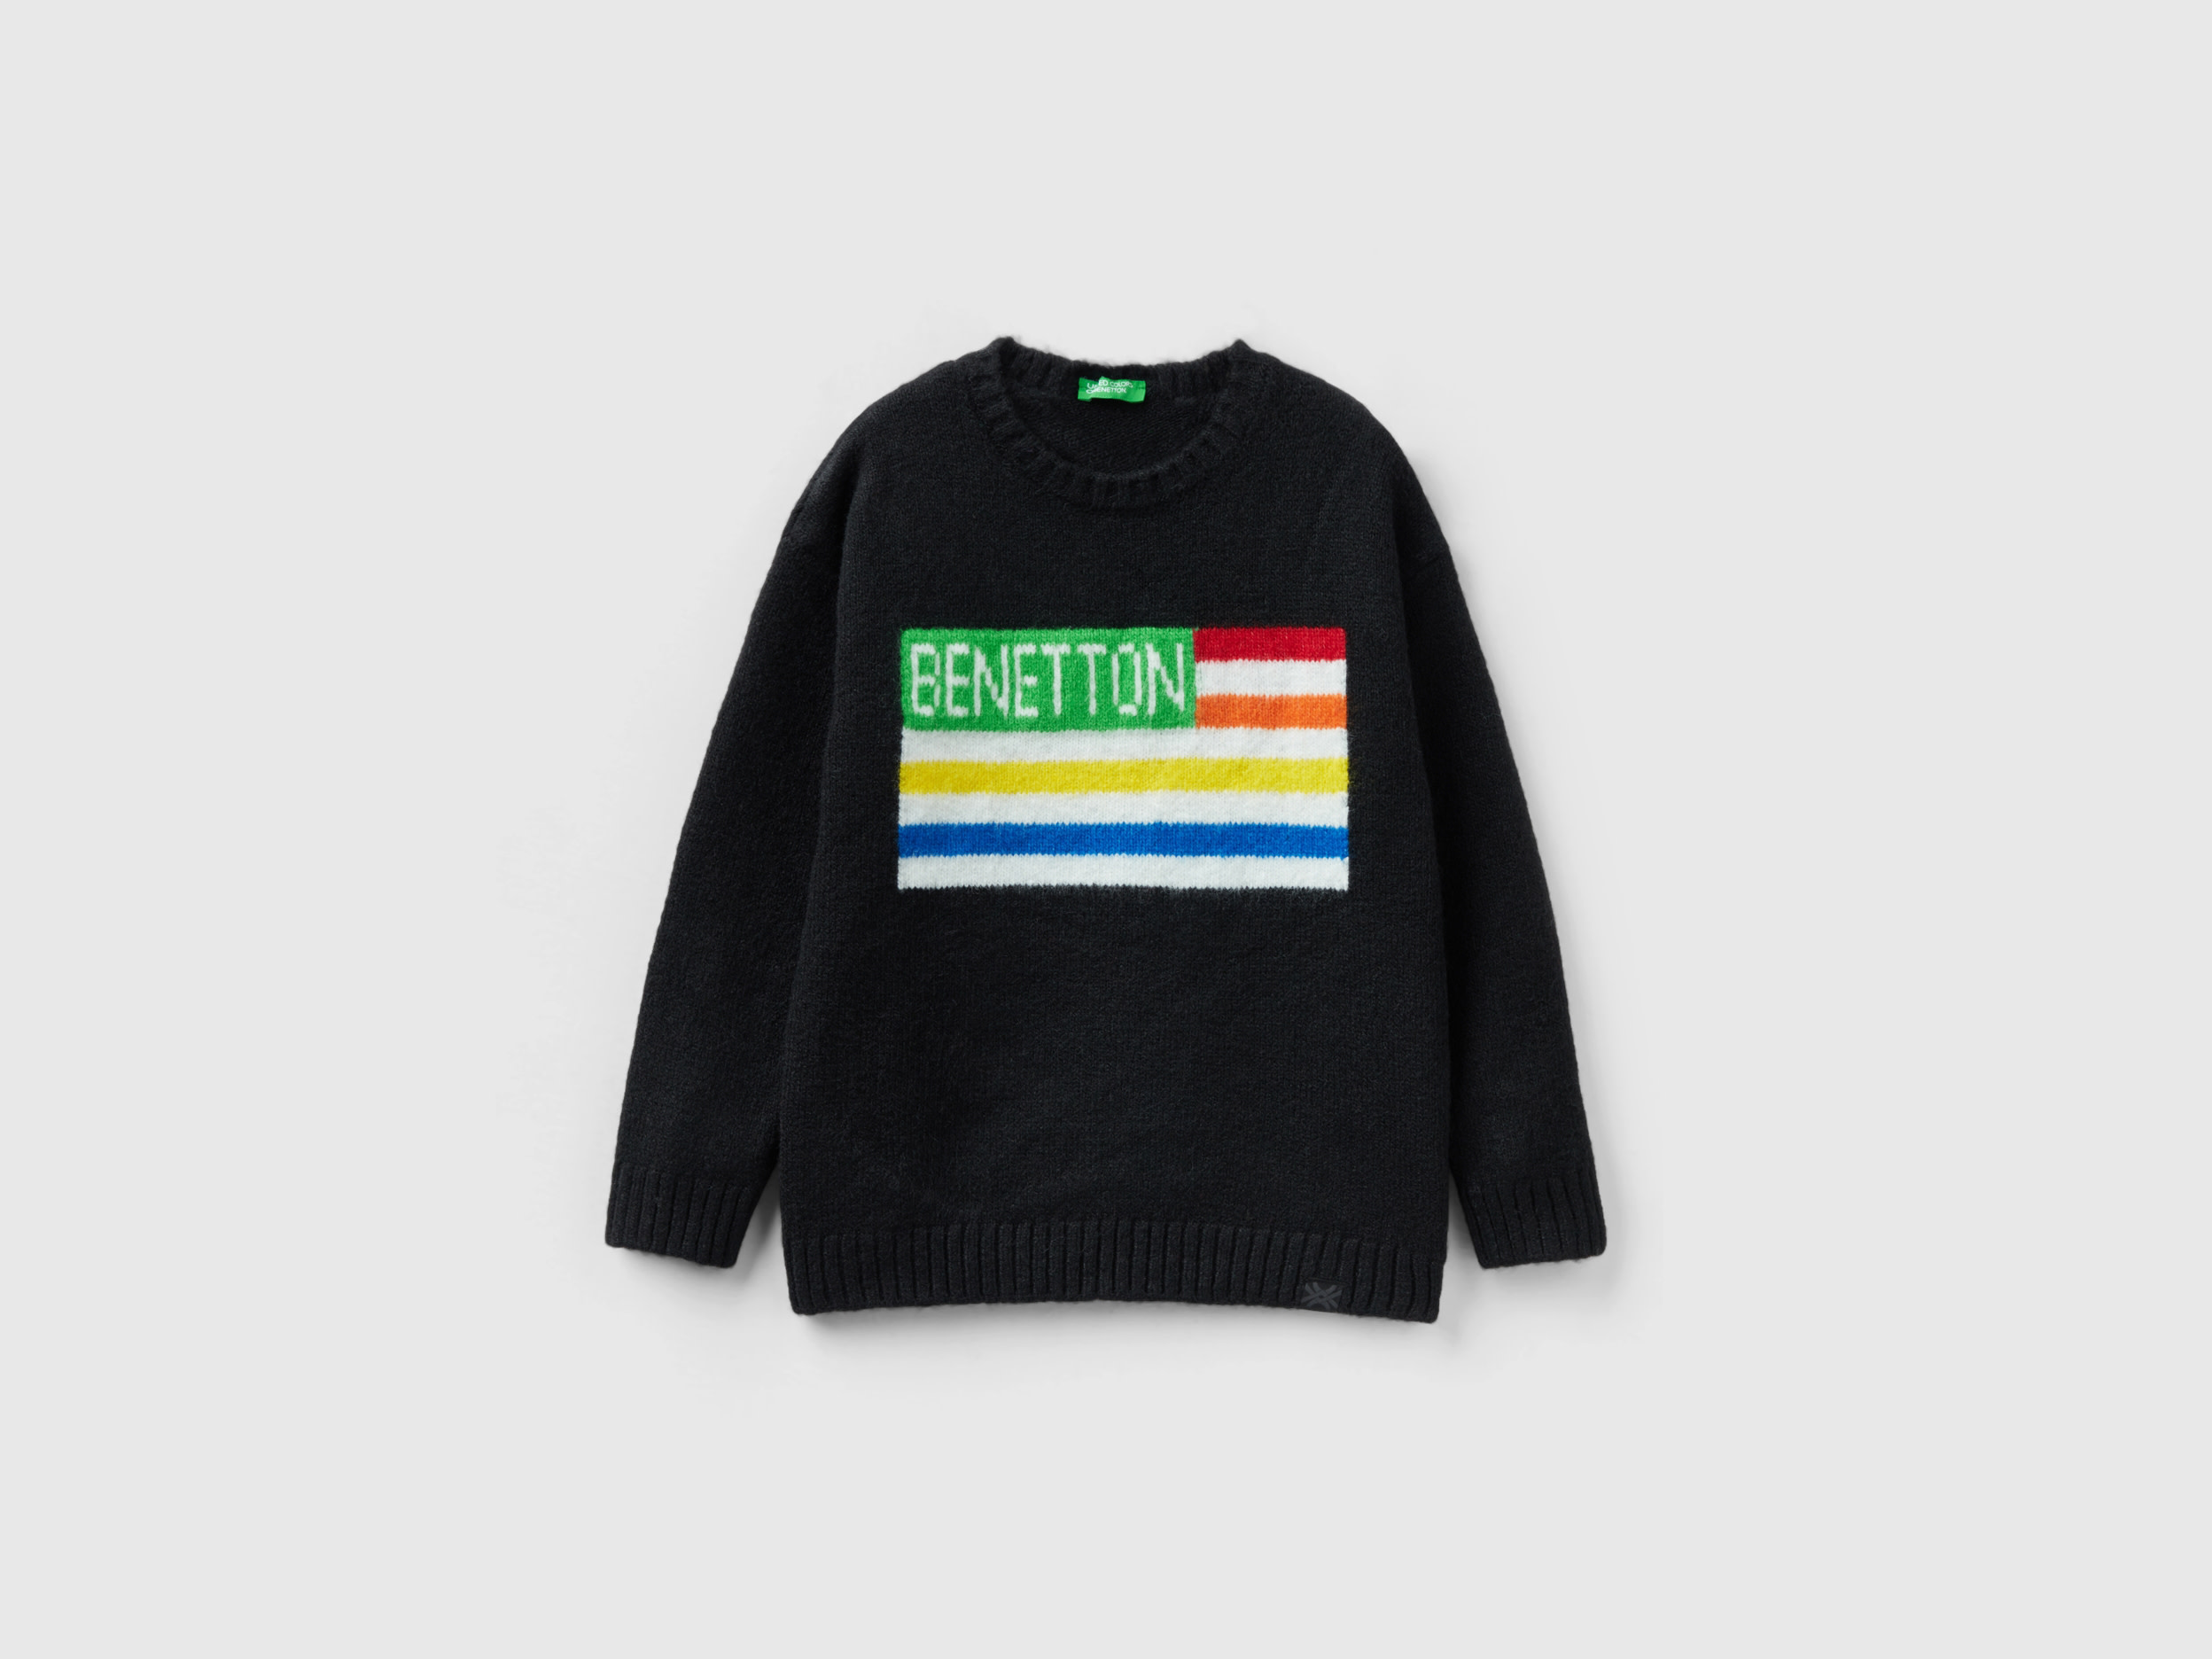 Benetton, Sweater With Flag Inlay, size 3XL, Black, Kids